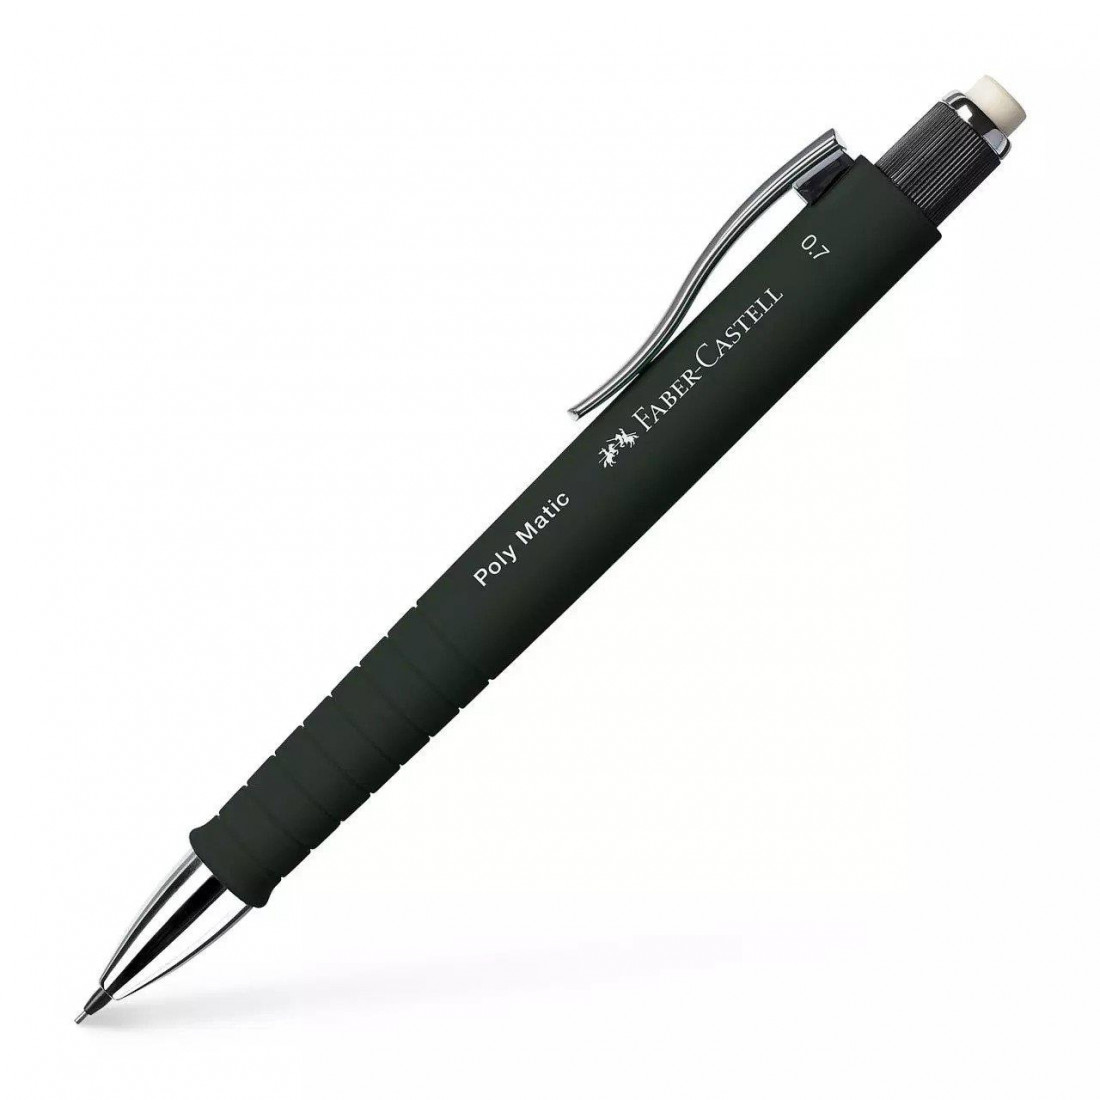 MECHANICAL PENCIL POLY MATIC BLACK 0,7MM FABER-CASTELL